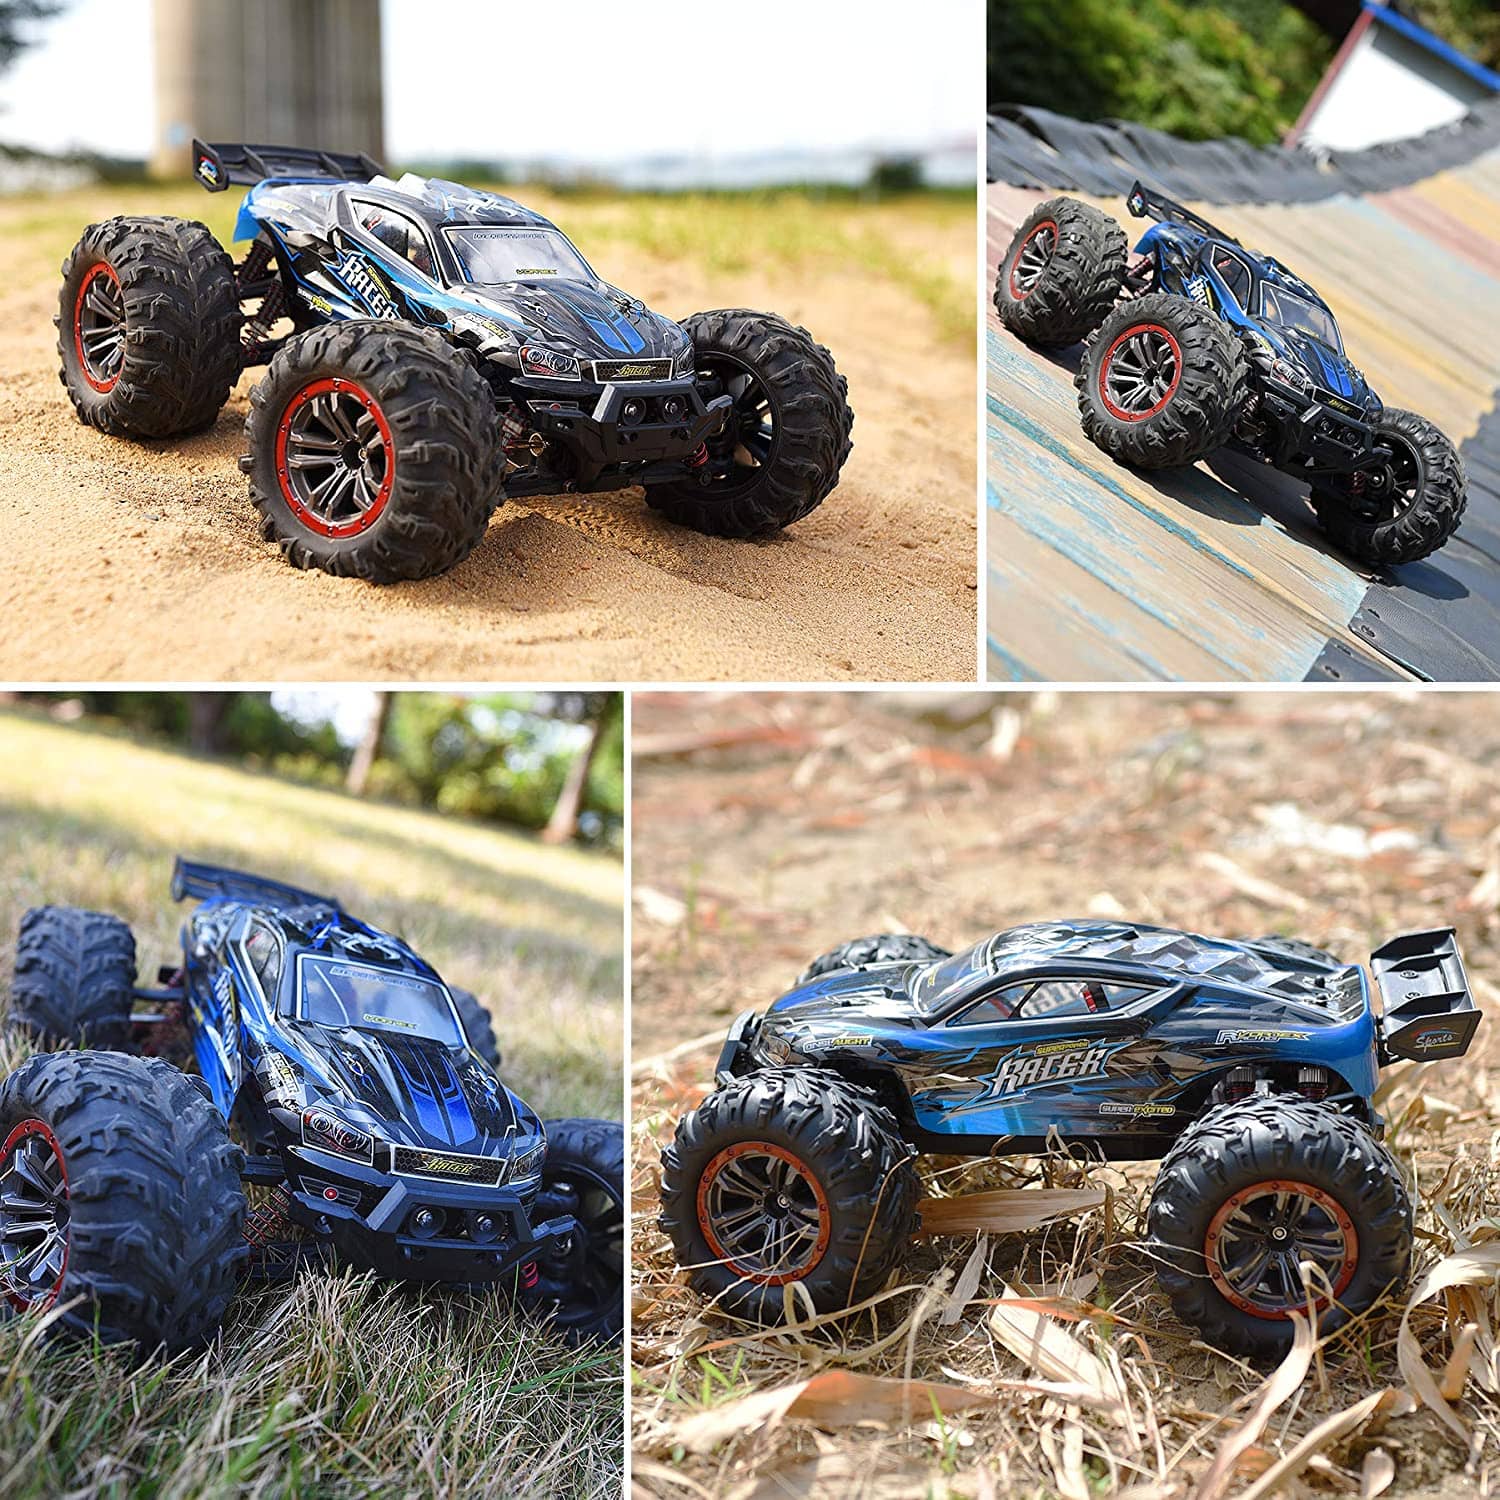 Hosim Large Size 1:12 Scale 46km+/H 4WD 2.4Ghz Monster Truck 9156 blue